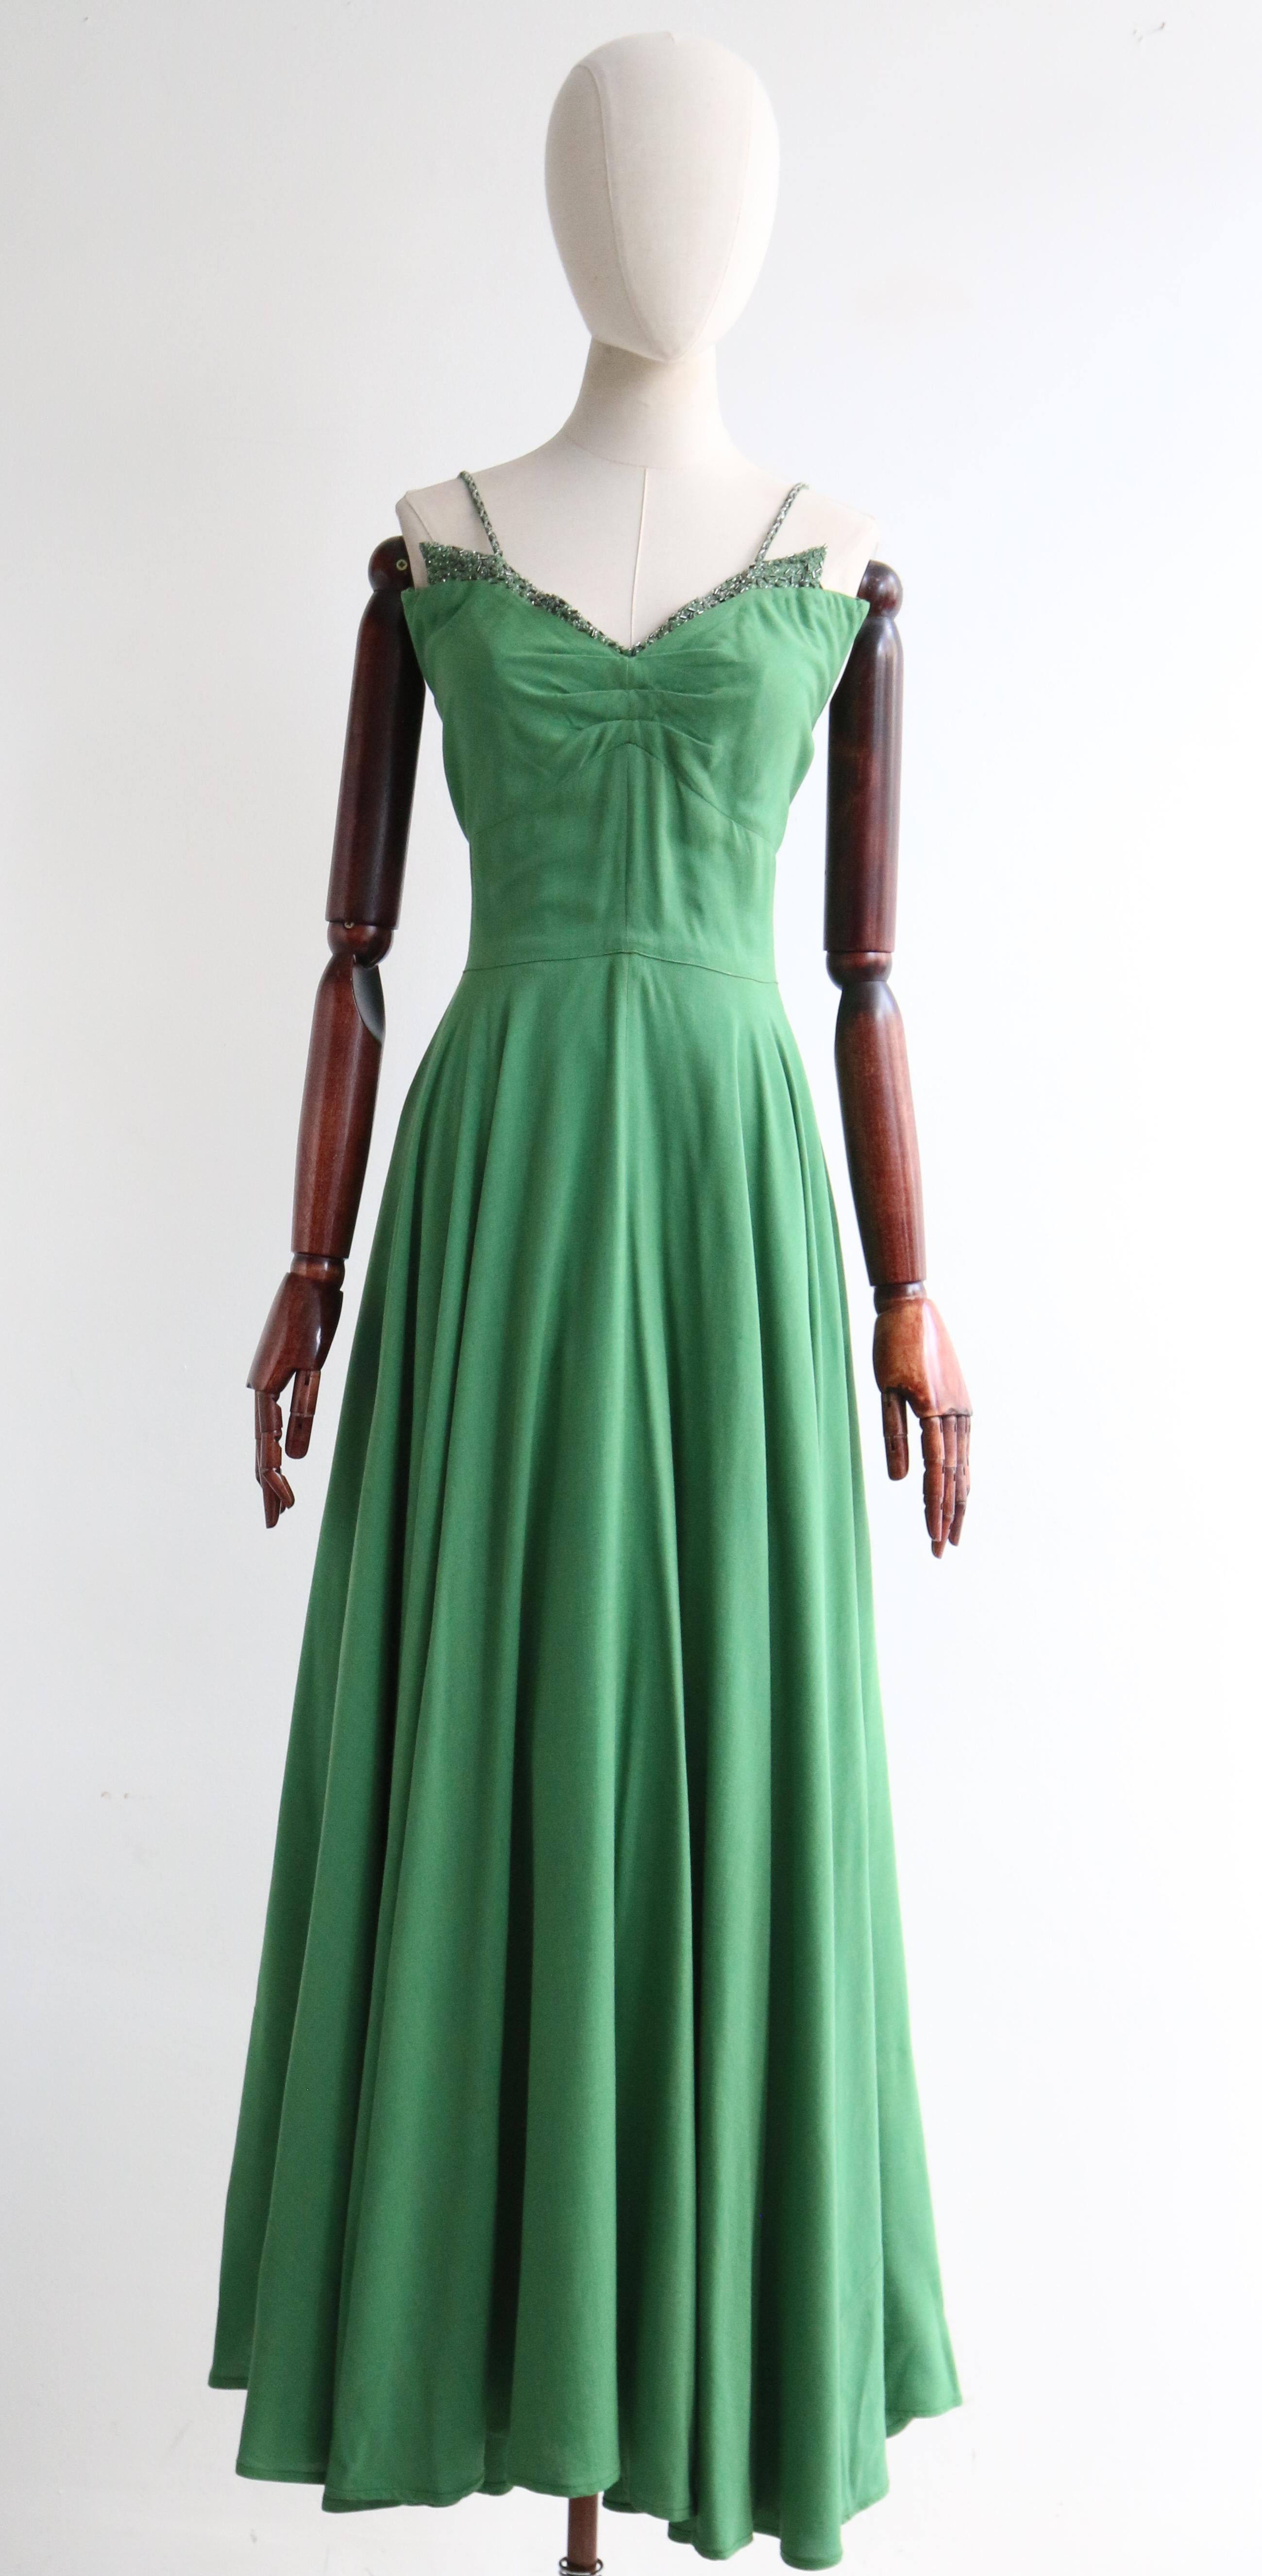 Made in the most delicious shade of jade green cotton and decorated with silver glass lined beads and gunmetal silver bugle beads, this original 1950's evening dress and matching bolero is just the perfect ensemble for that special occasion. 

The V